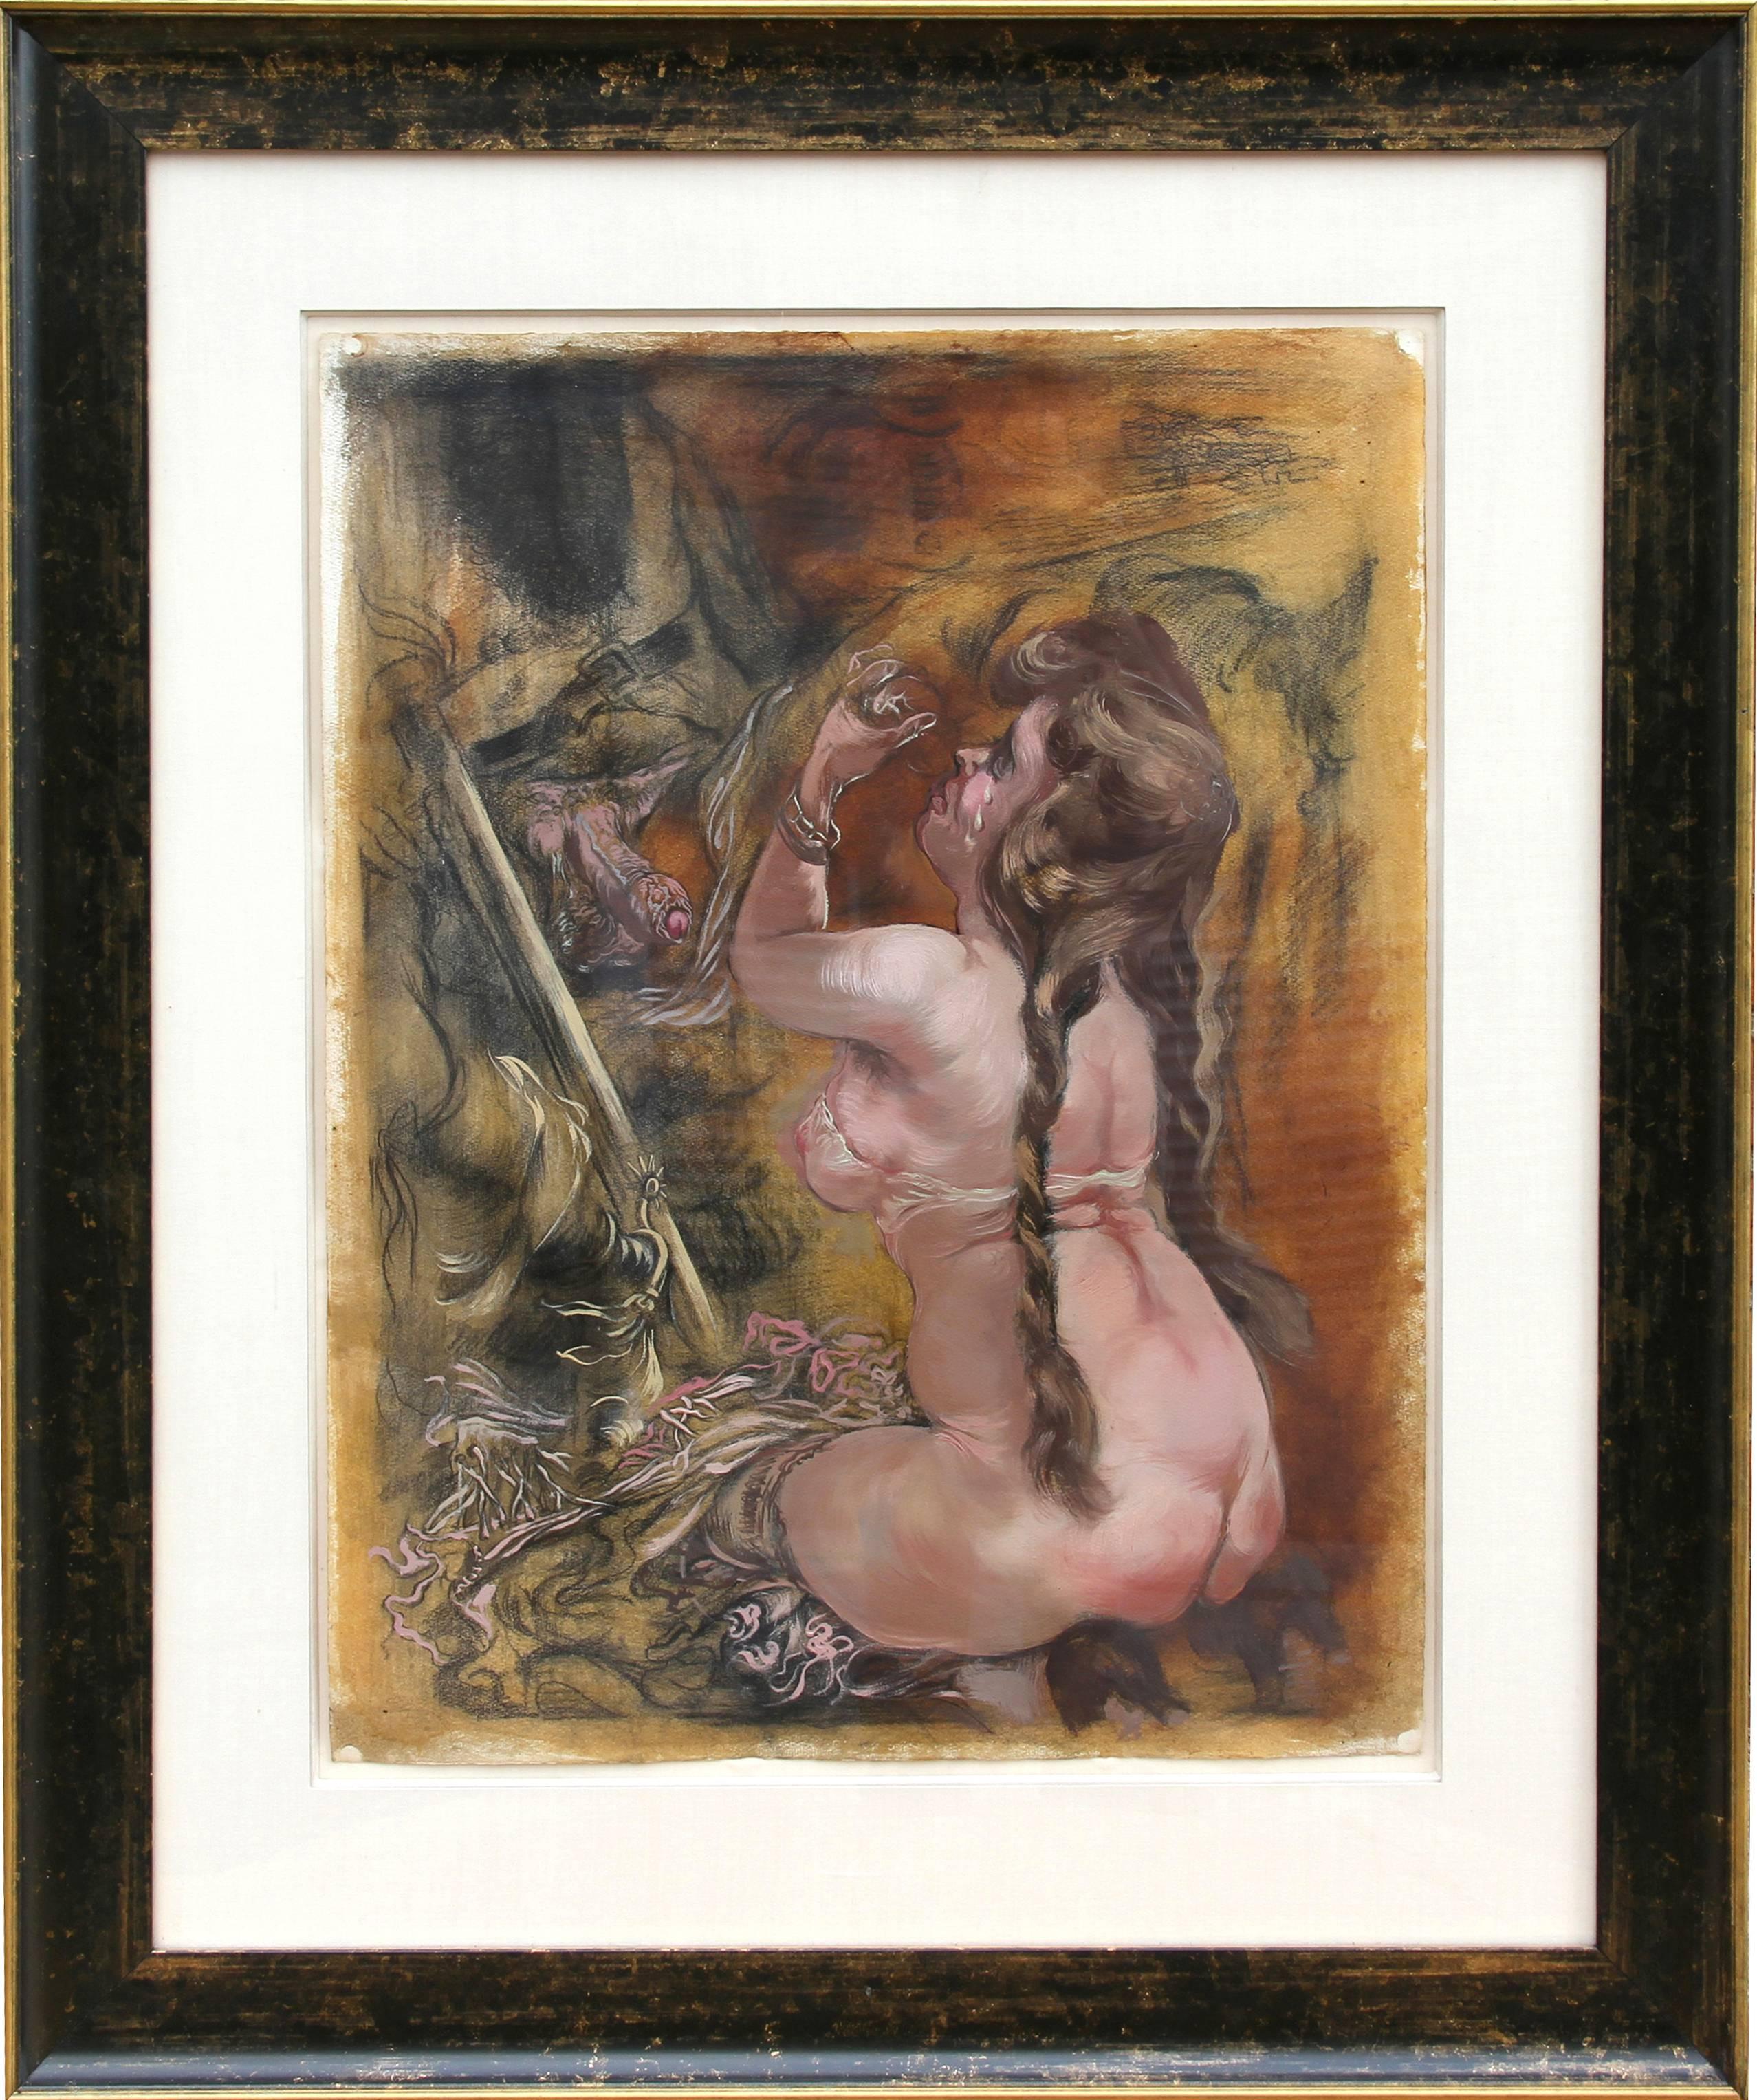 Artist:	George Grosz, German (1893 - 1959)
Title: Aroused	
Year: 1940 
Medium: Oil on Paper, signed l.r.
Paper Size: 24 x 18 in. (60.96 x 45.72 cm)
Frame Size: 36 x 30 inches 

Provenance: Estate of Artist 
Estate Stamped on Verso UC 335-30